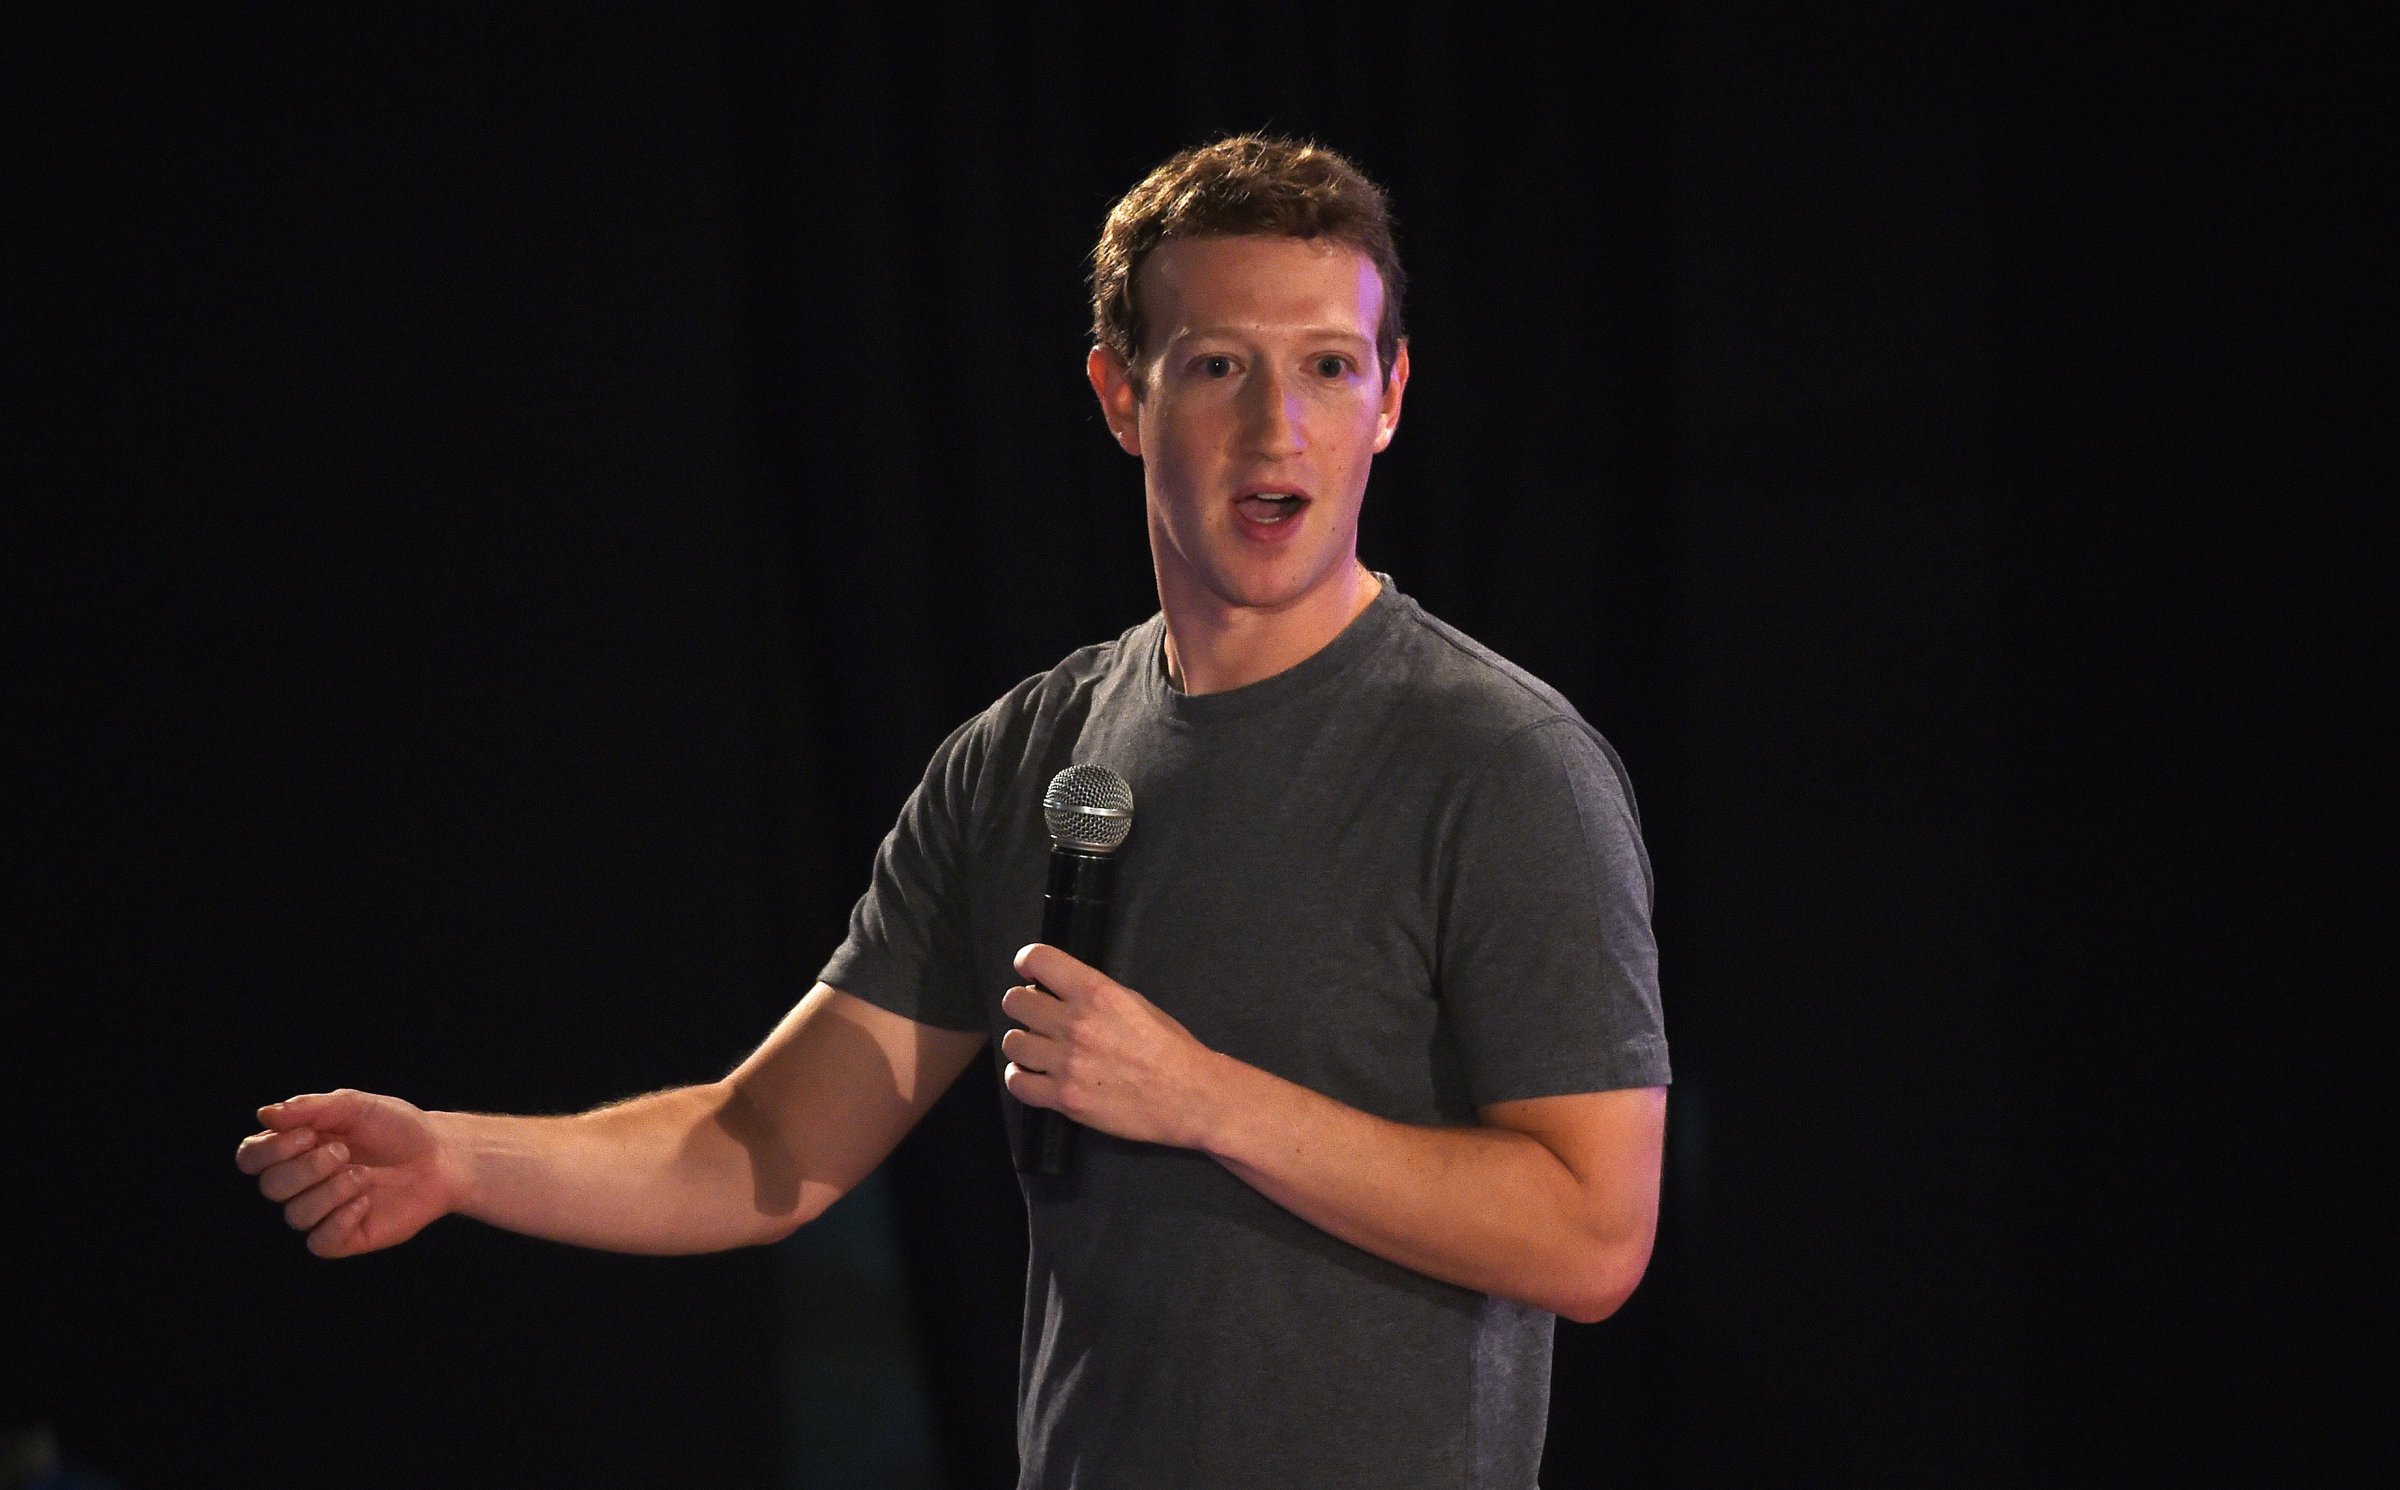 Facebook chief executive and founder Mark Zuckerberg speaks during a 'town-hall' meeting at the Indian Institute of Technology (IIT) in New Delhi on October 28, 2015.